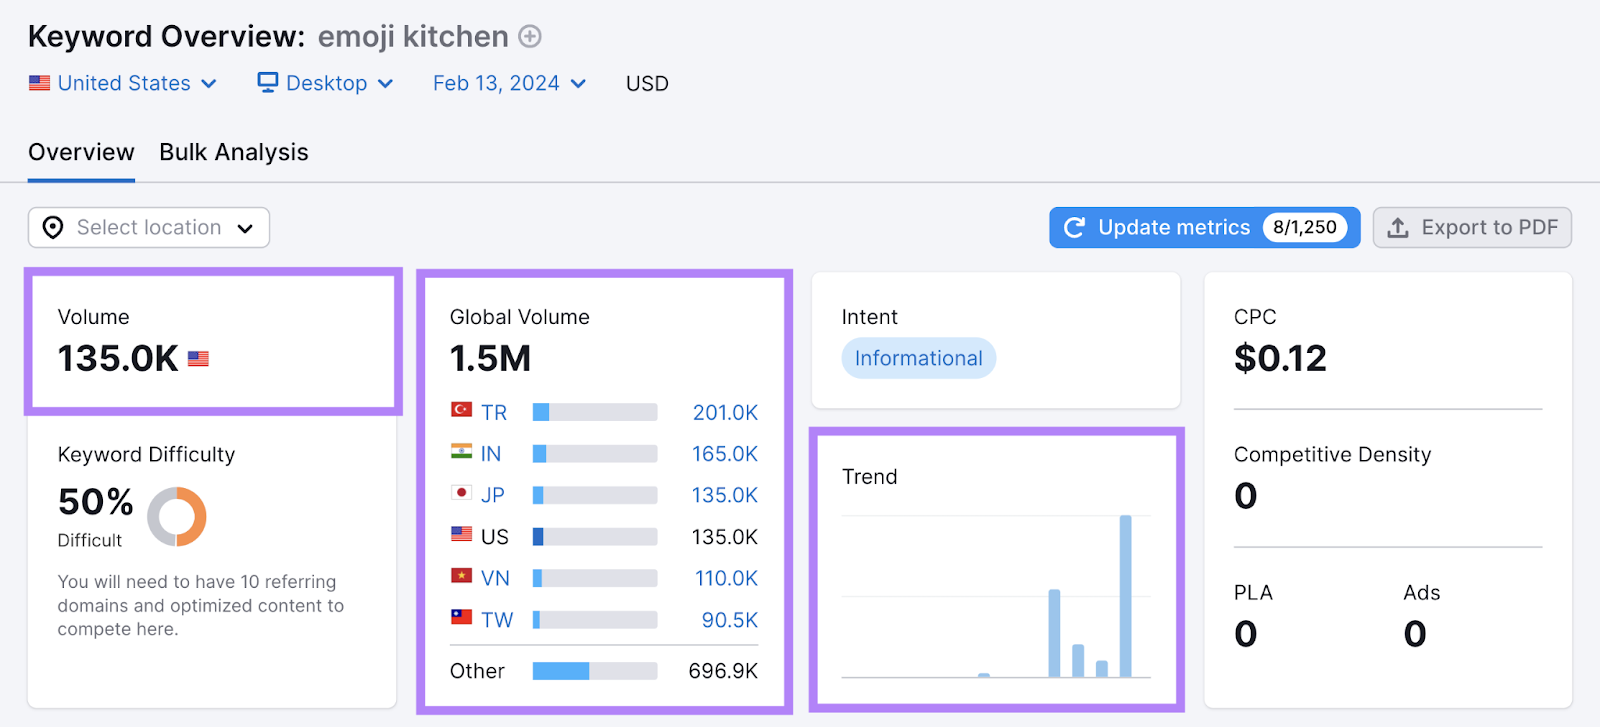 Keyword Overview tool results for "emoji kitchen" with "Volume," "Global Volume, and "Trend" metrics highlighted